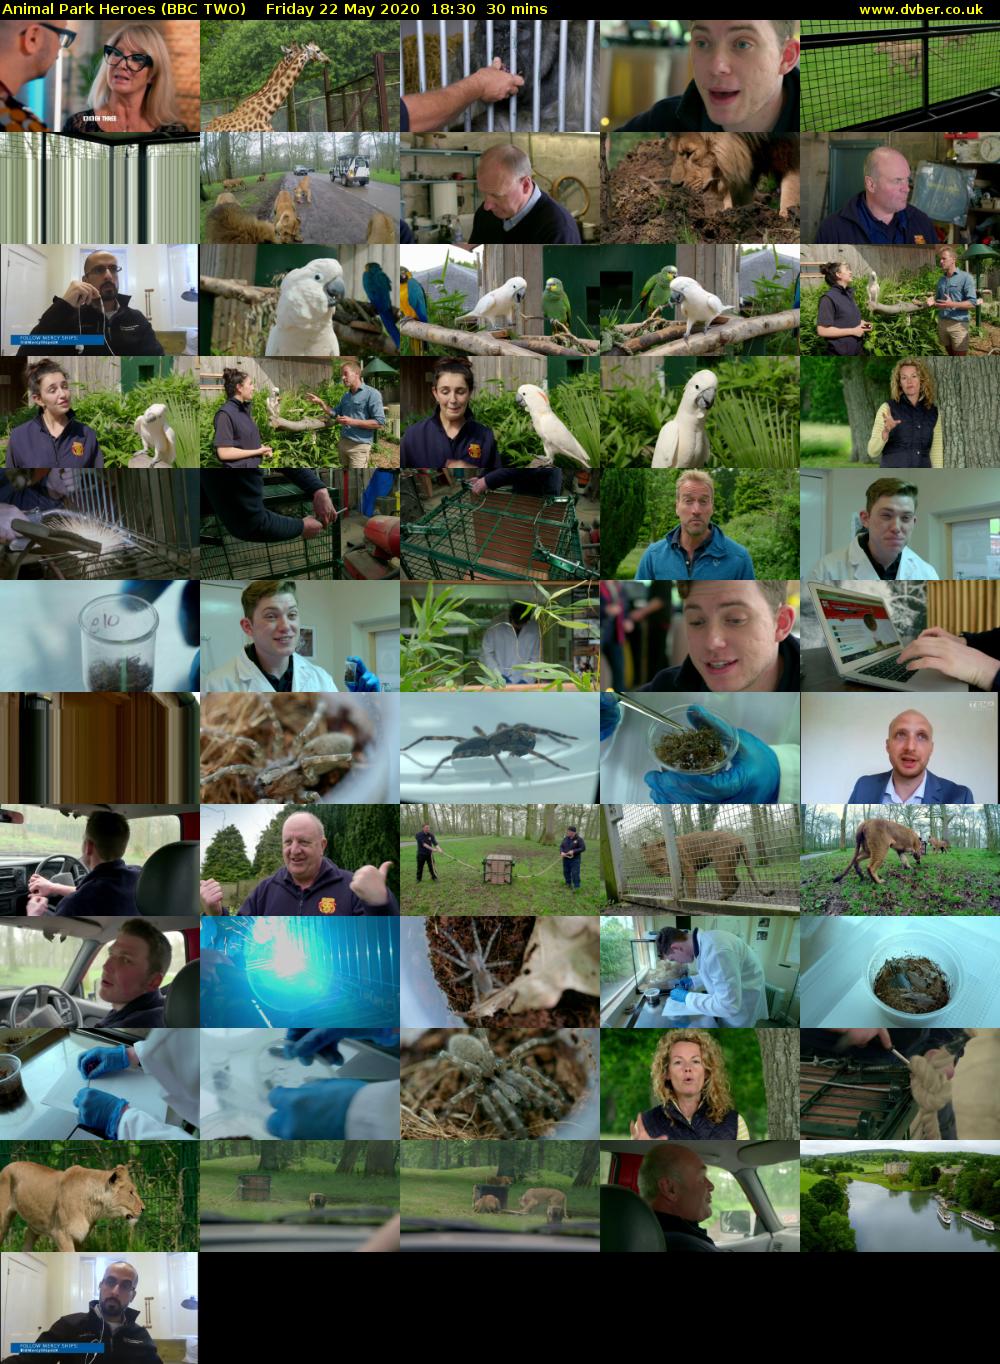 Animal Park Heroes (BBC TWO) Friday 22 May 2020 18:30 - 19:00